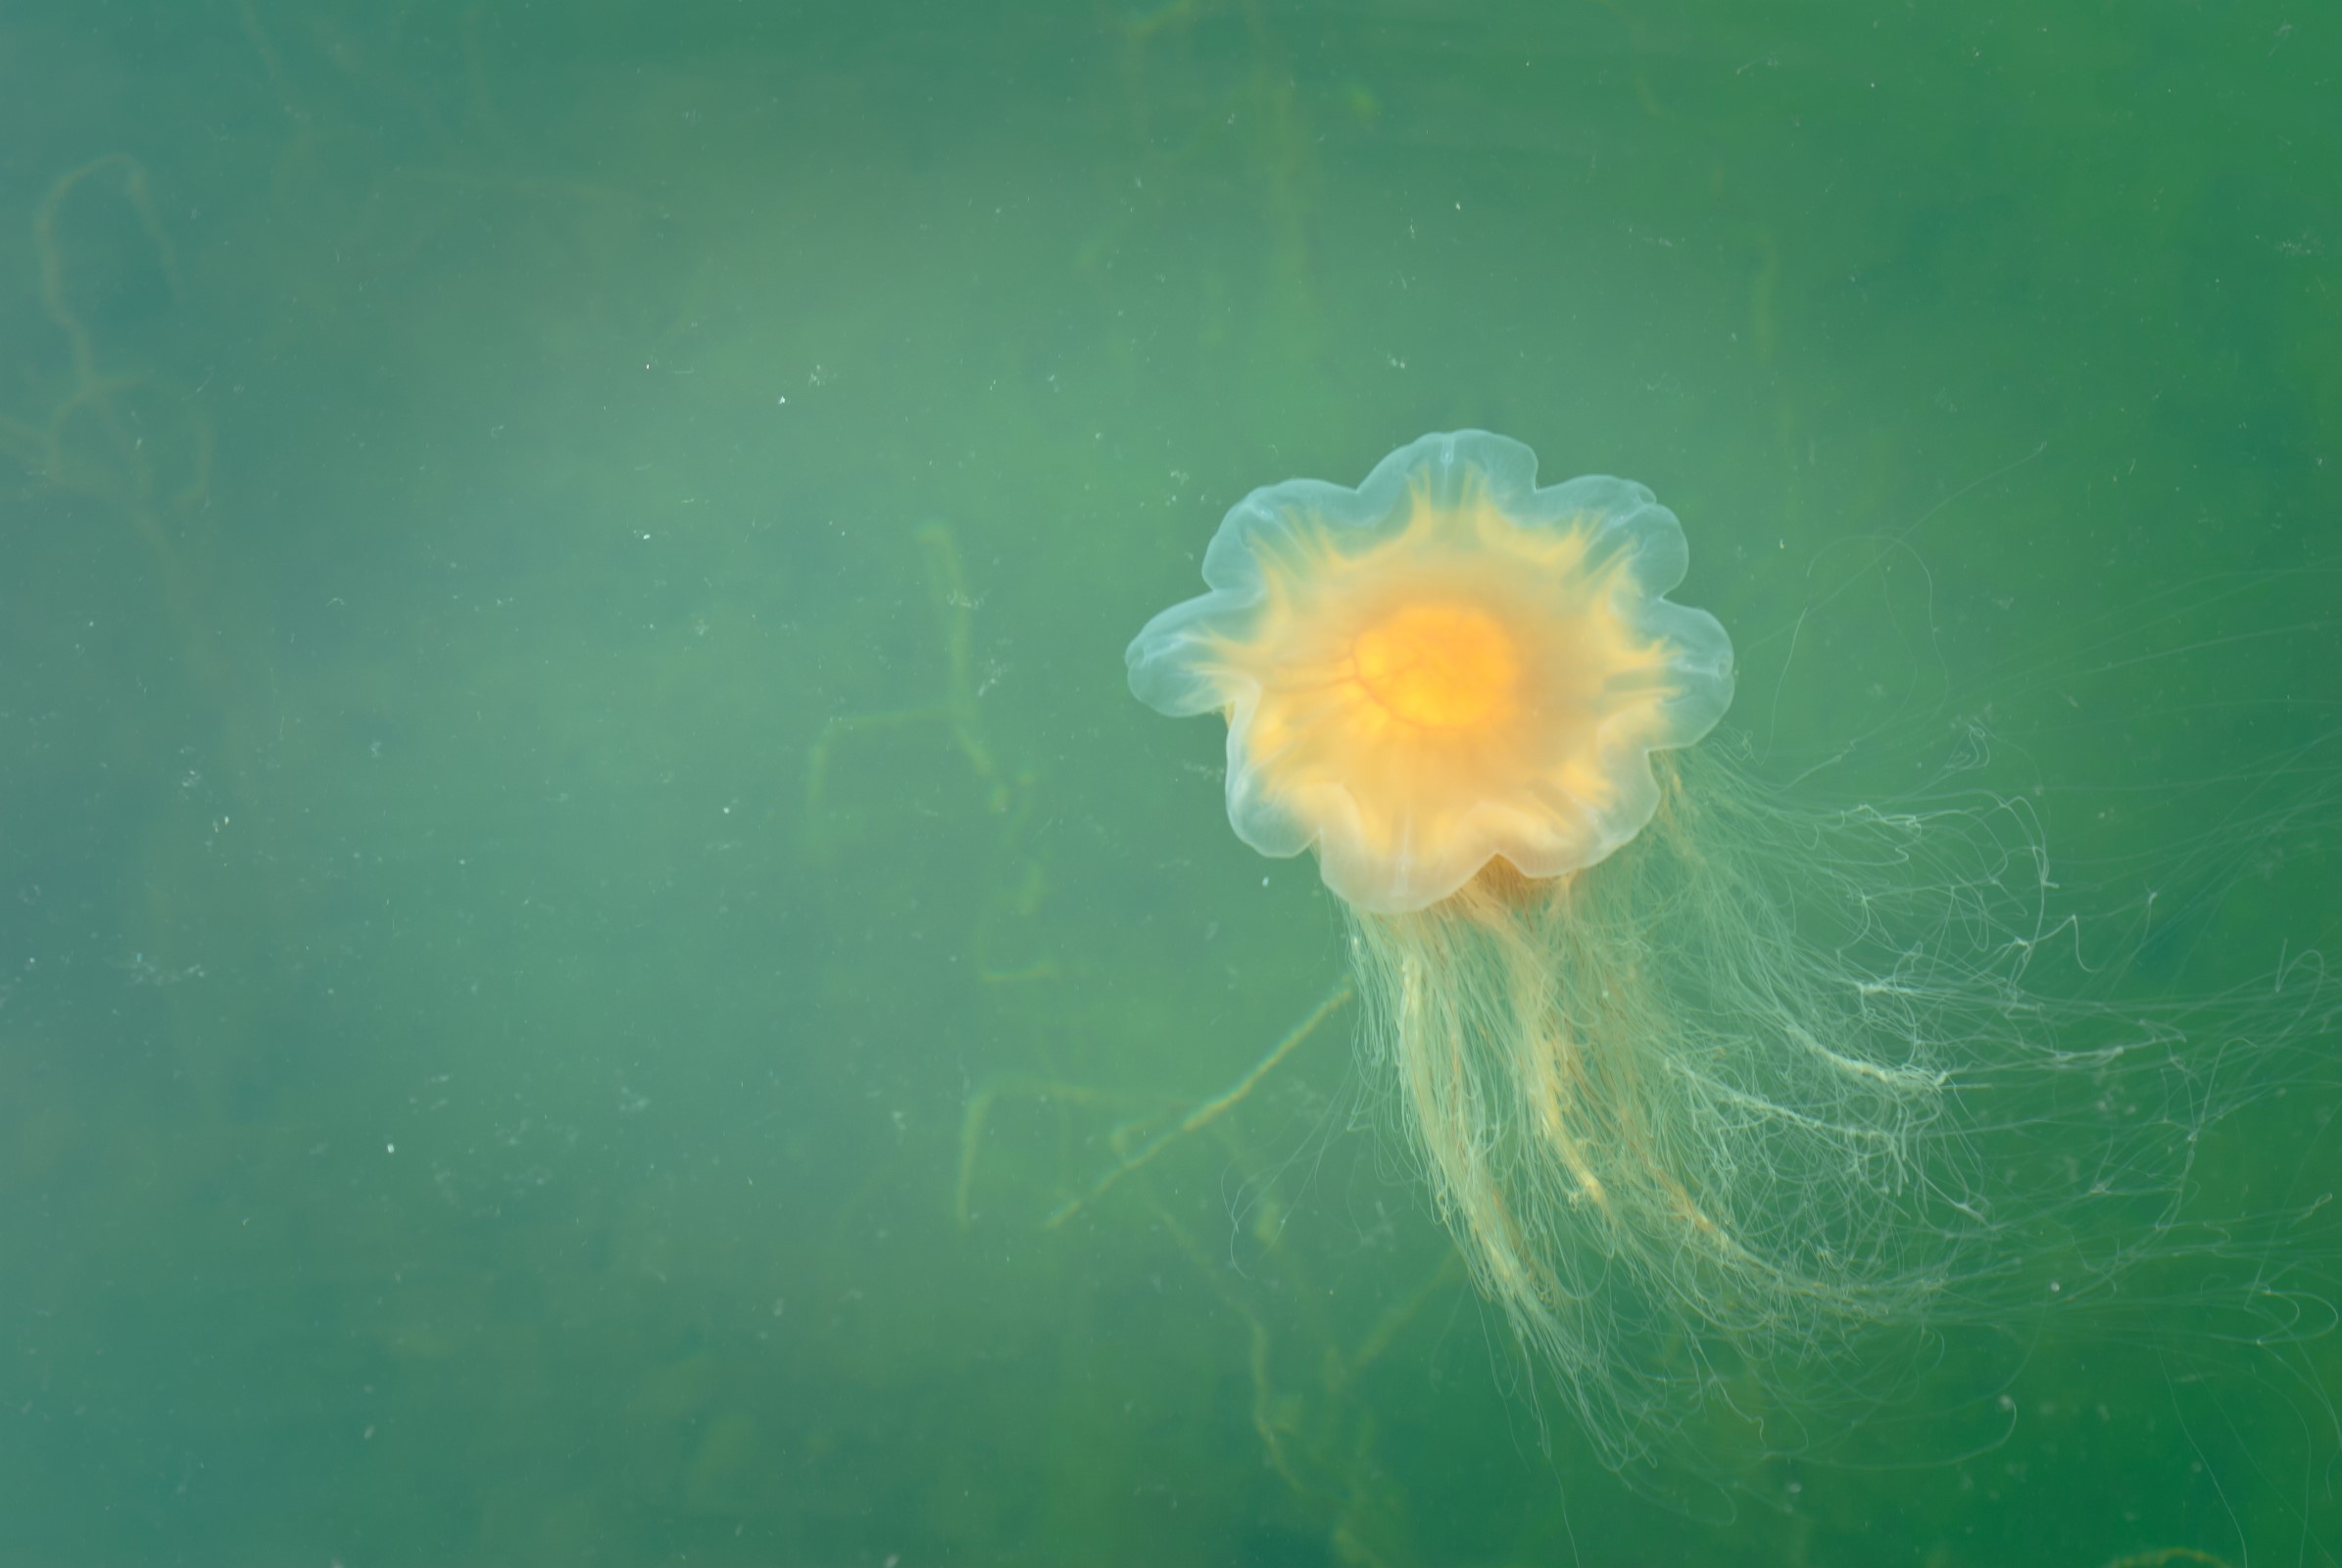 Jellyfish are usually not dangerous, here a jellyfish with a yellow color in the middle